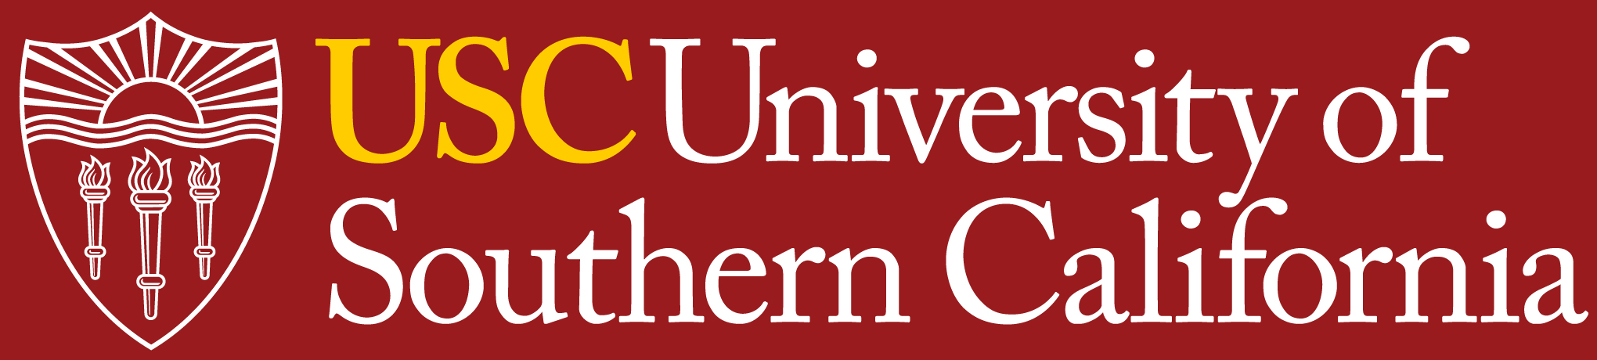 usc-seal-1597x360.png